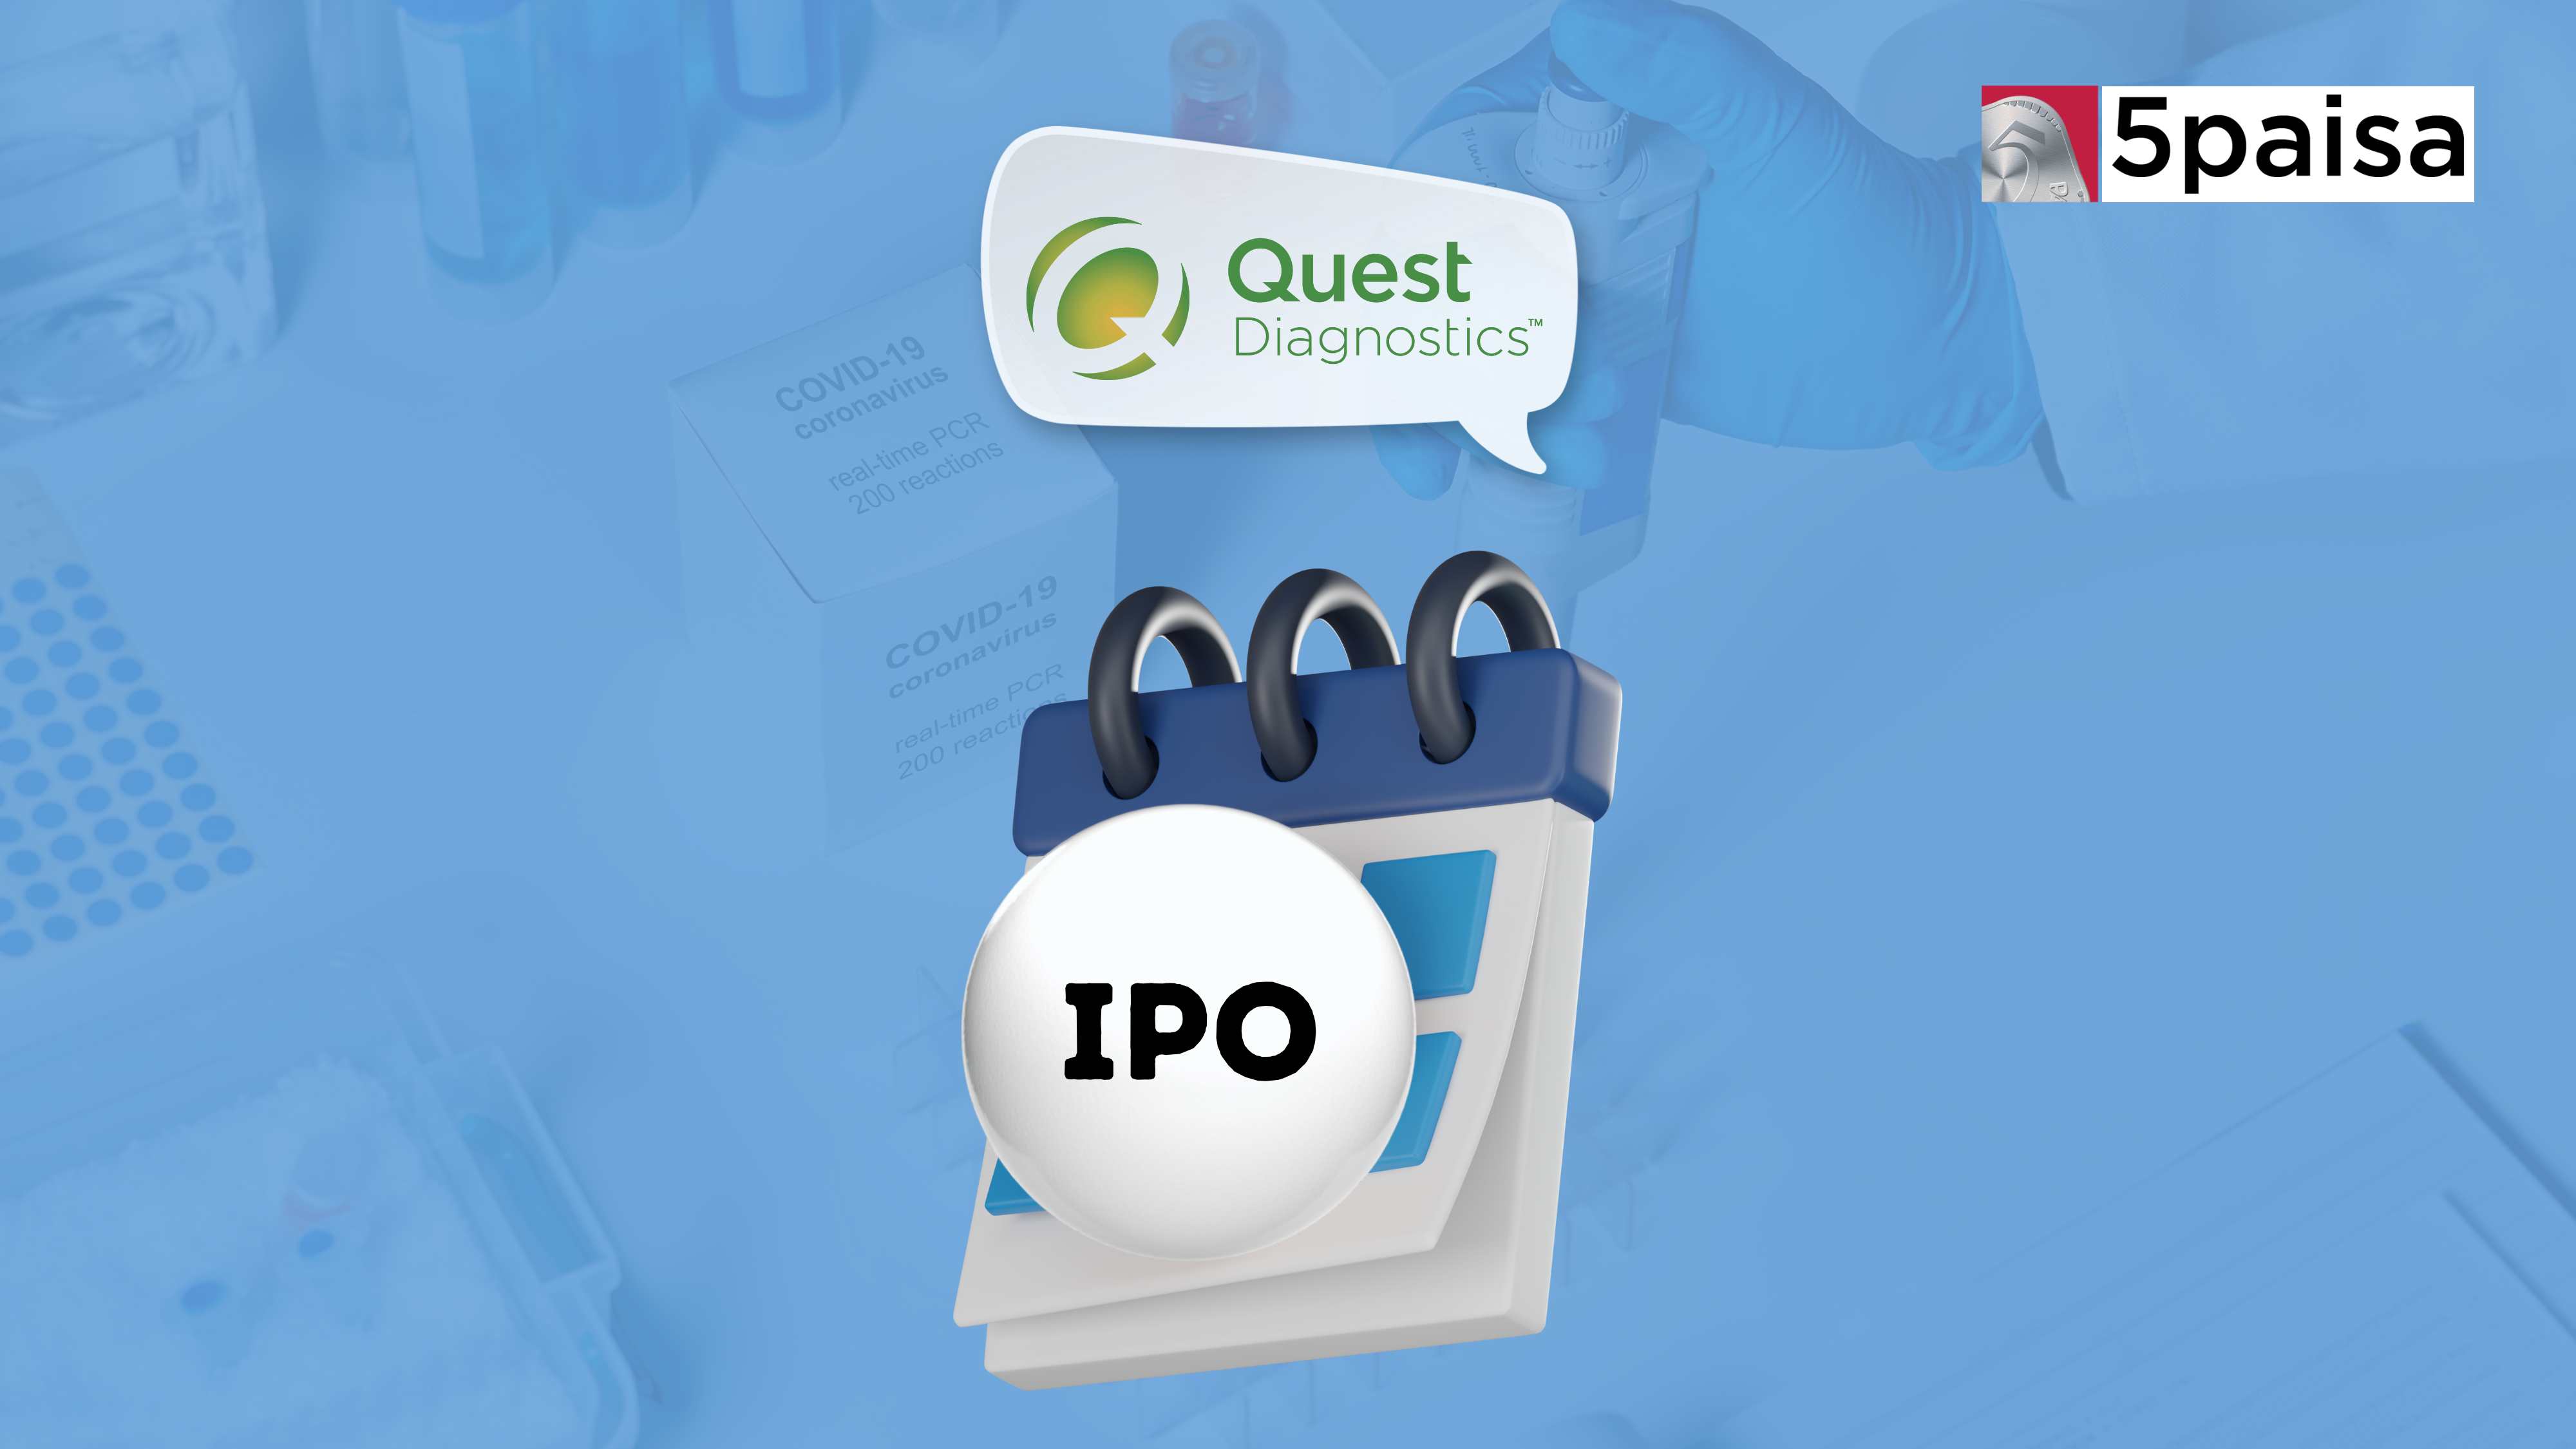 Quest Laboratories IPO Subscribed 85.26 times